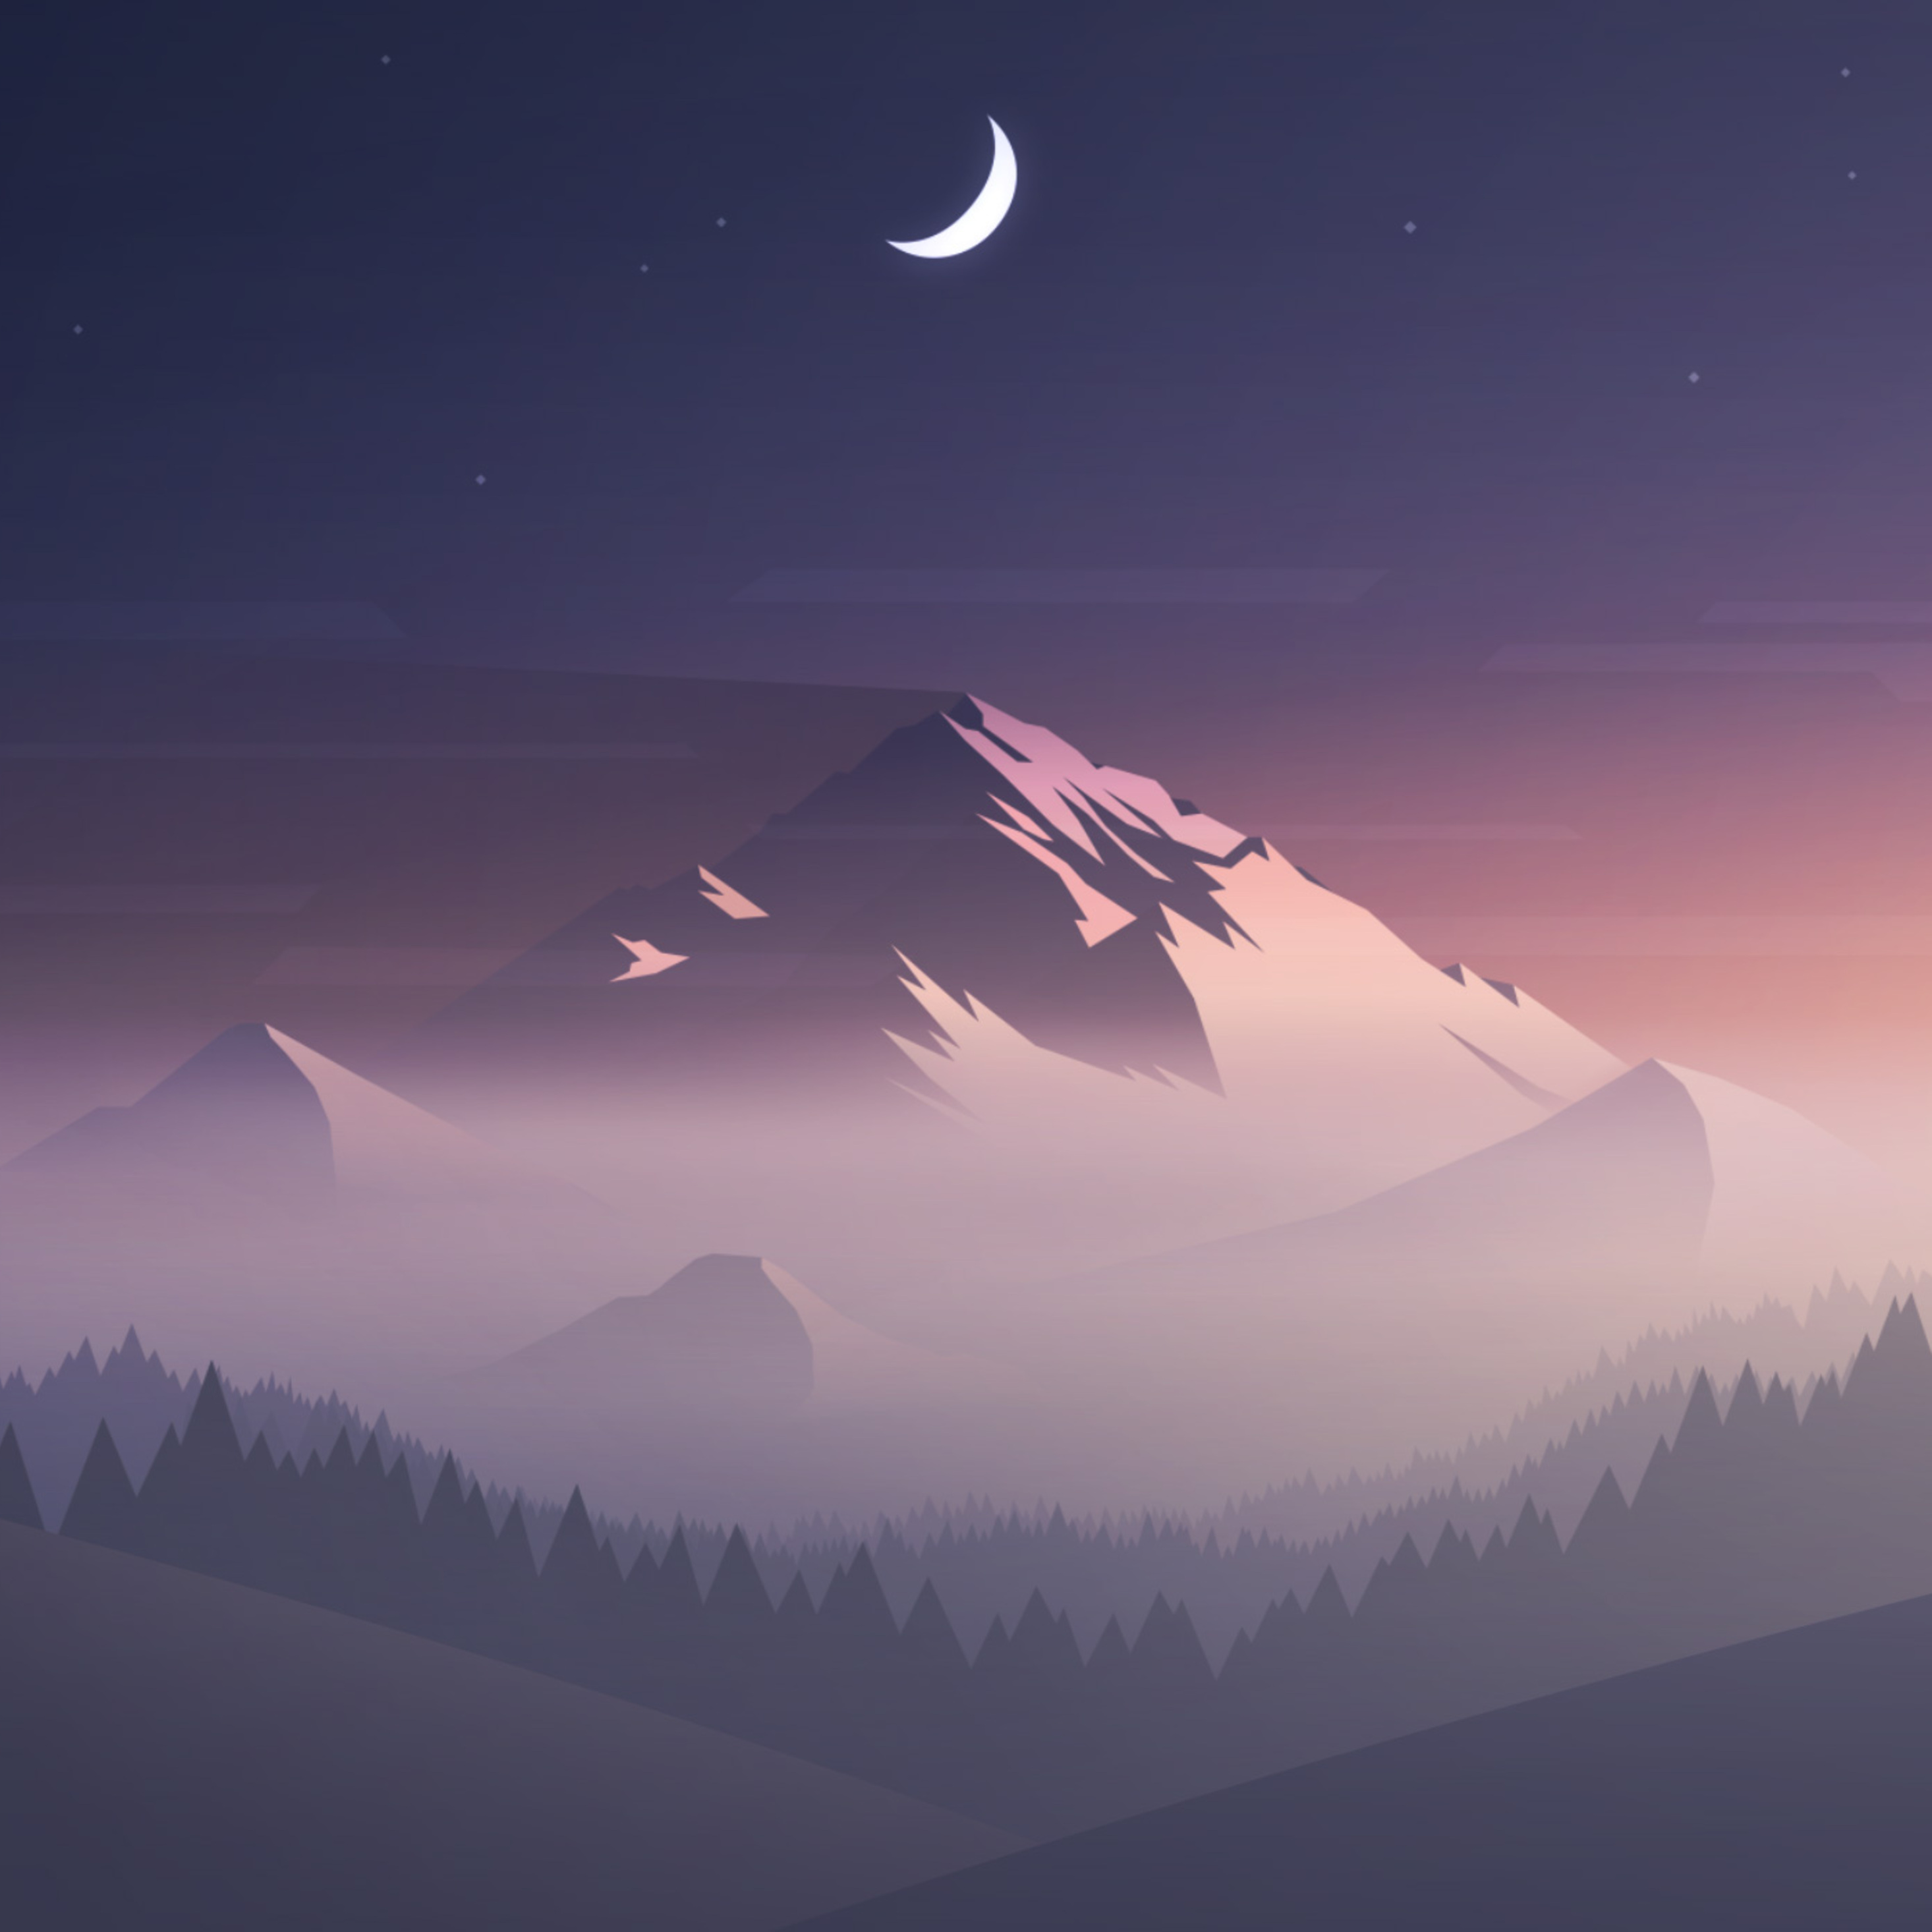 A purple and blue illustration of a mountain range at night - Mountain